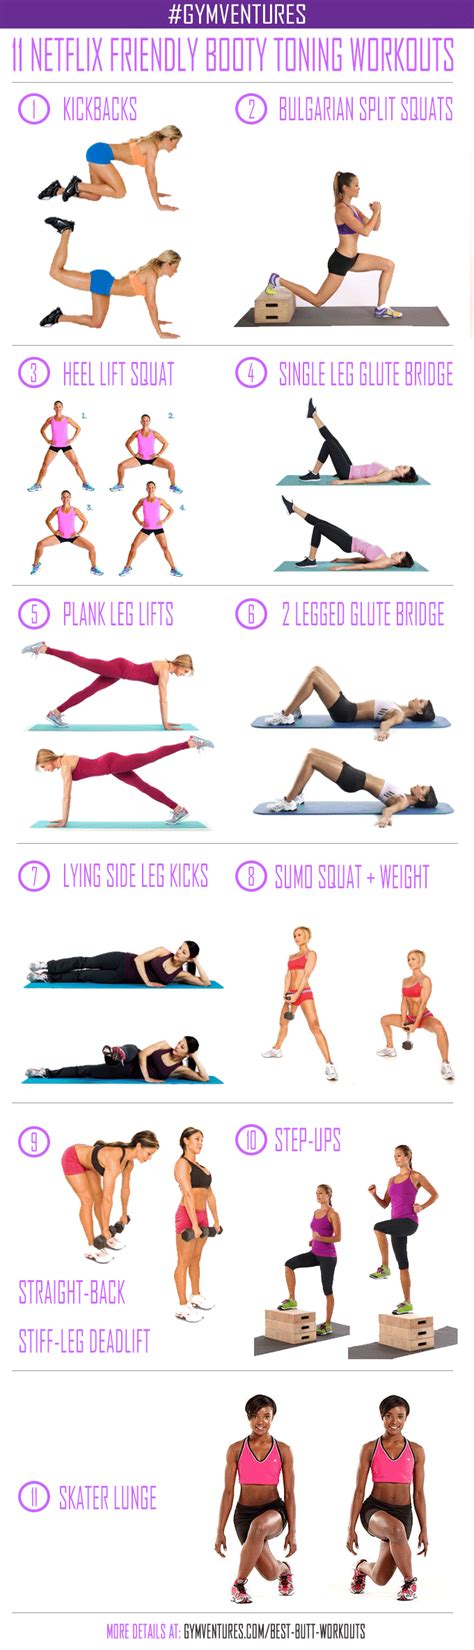 Best Butt Workouts You Can Do At Home Infographic